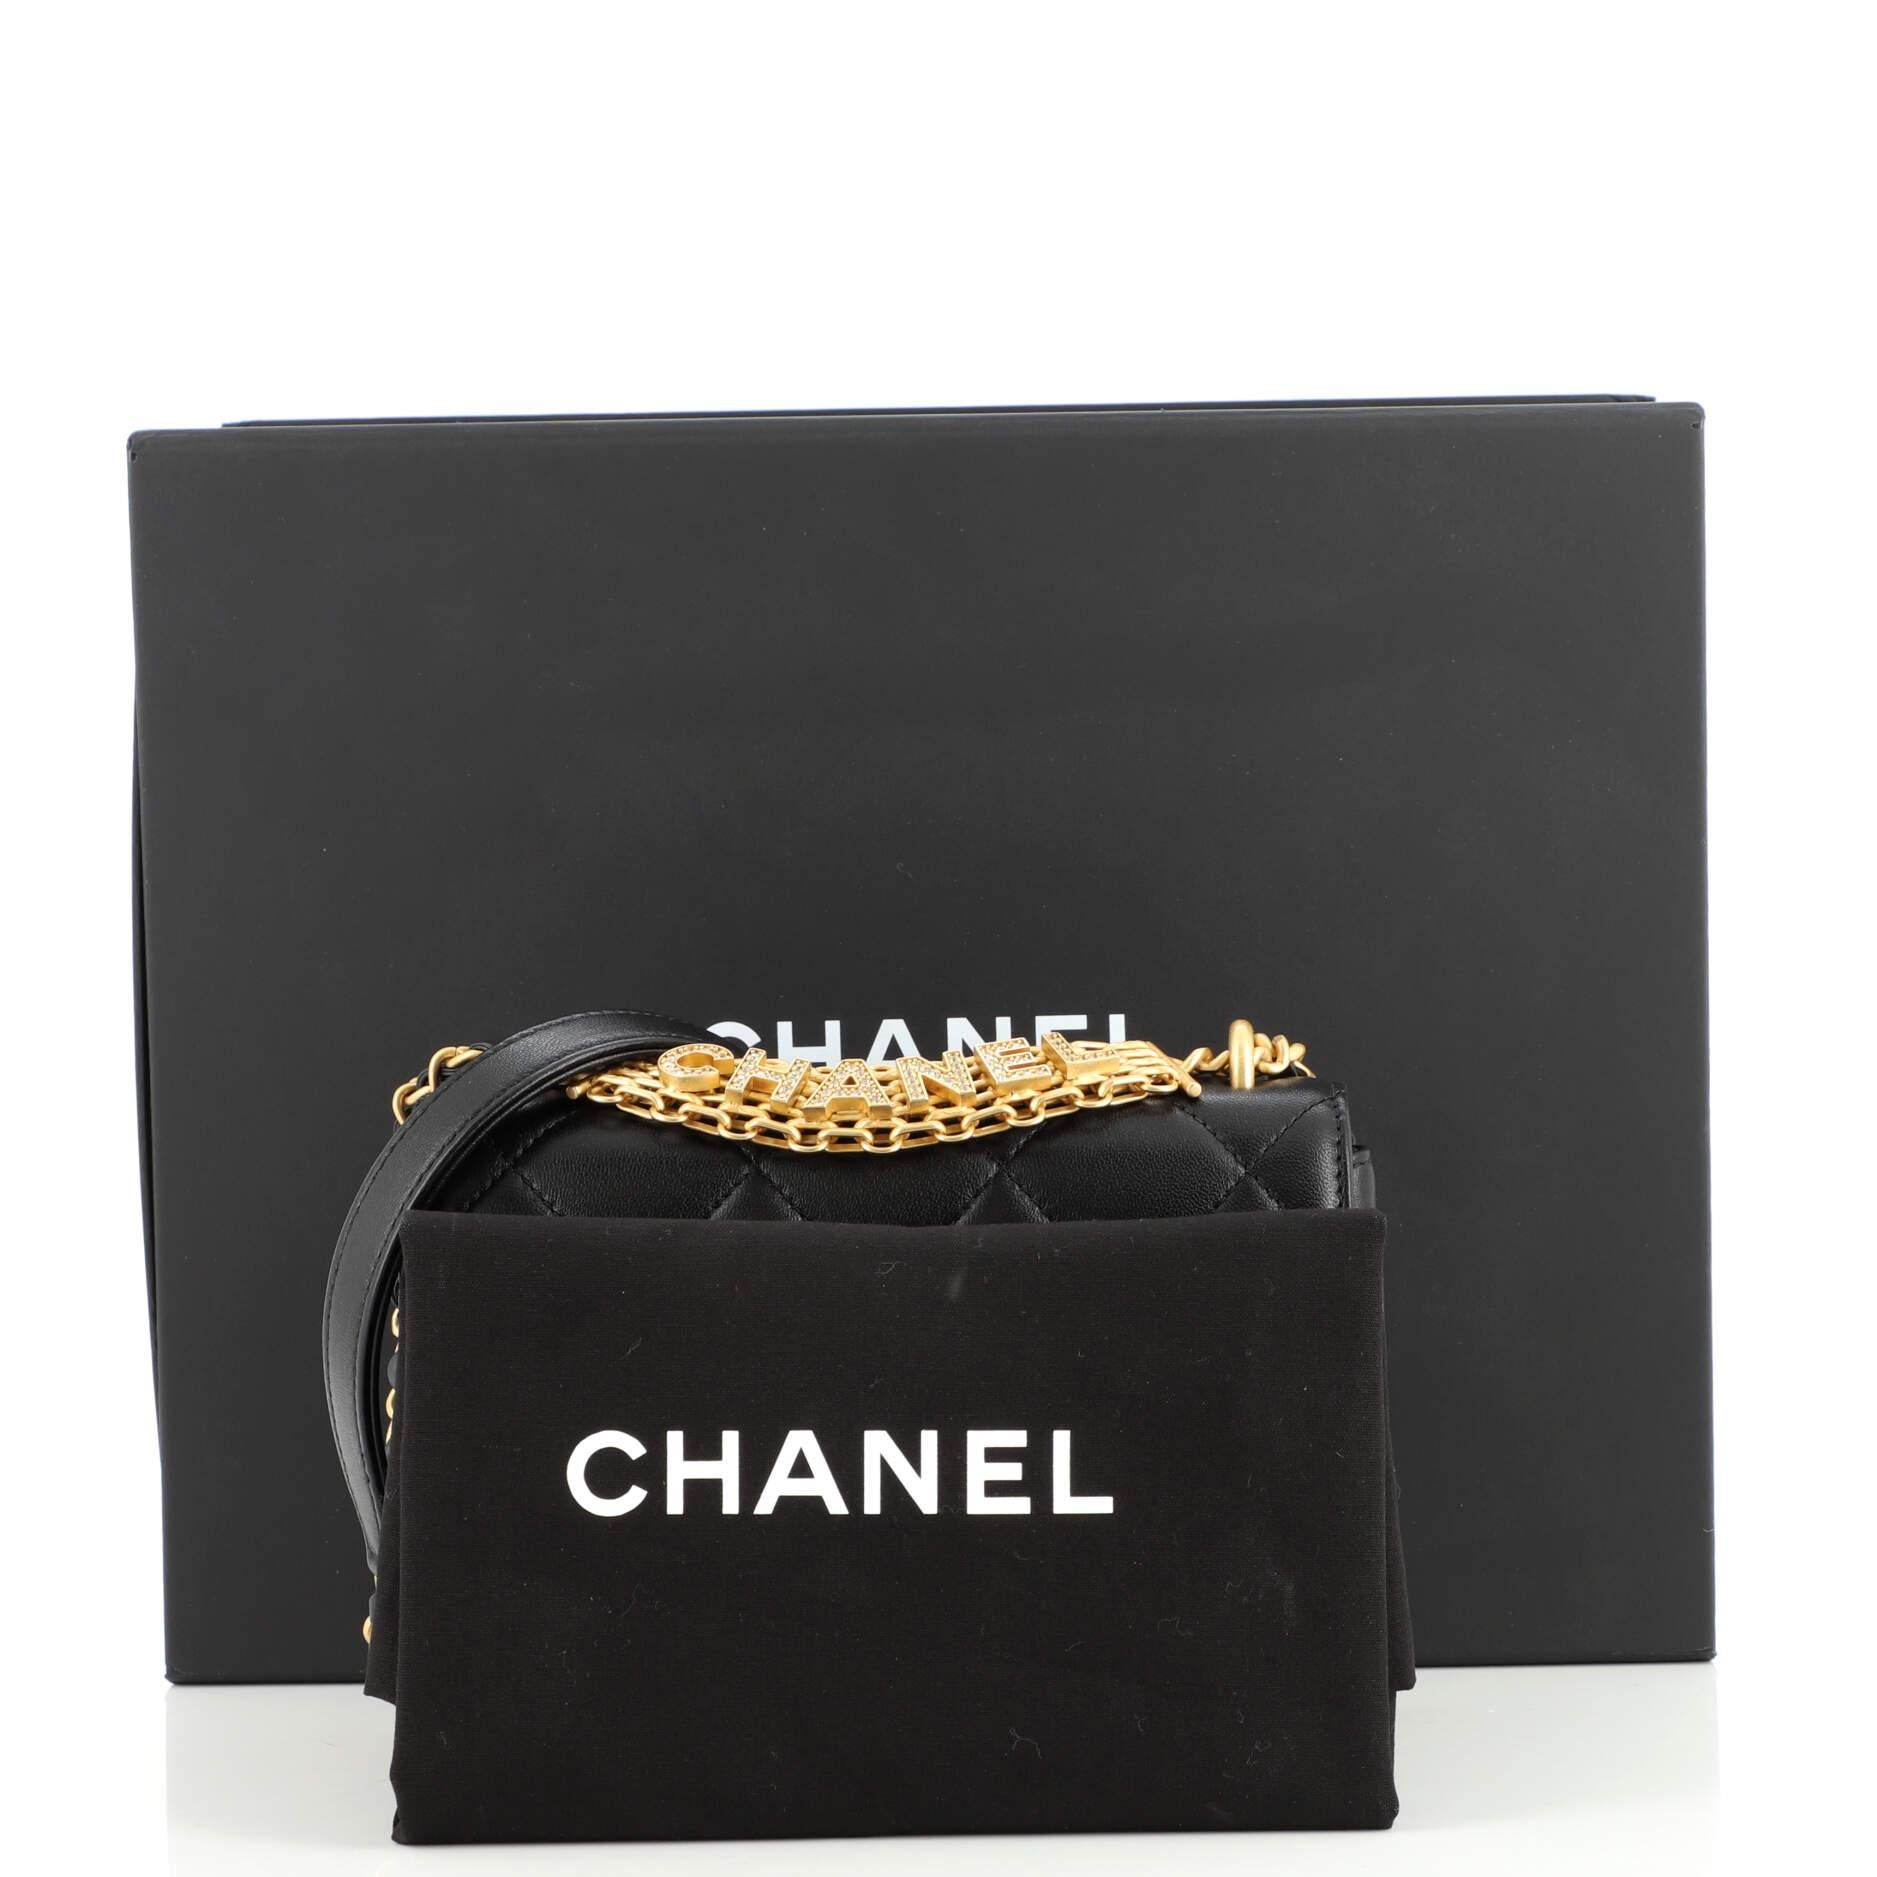 Condition: Great. Minor scuffs and creasing on exterior and underneath flap, light wear in interior, scratches on hardware.
Accessories: Dust Bag, Box
Measurements:
Designer: Chanel
Model: Crystal Logo Letters Chain Handle Flap Bag Quilted Lambskin